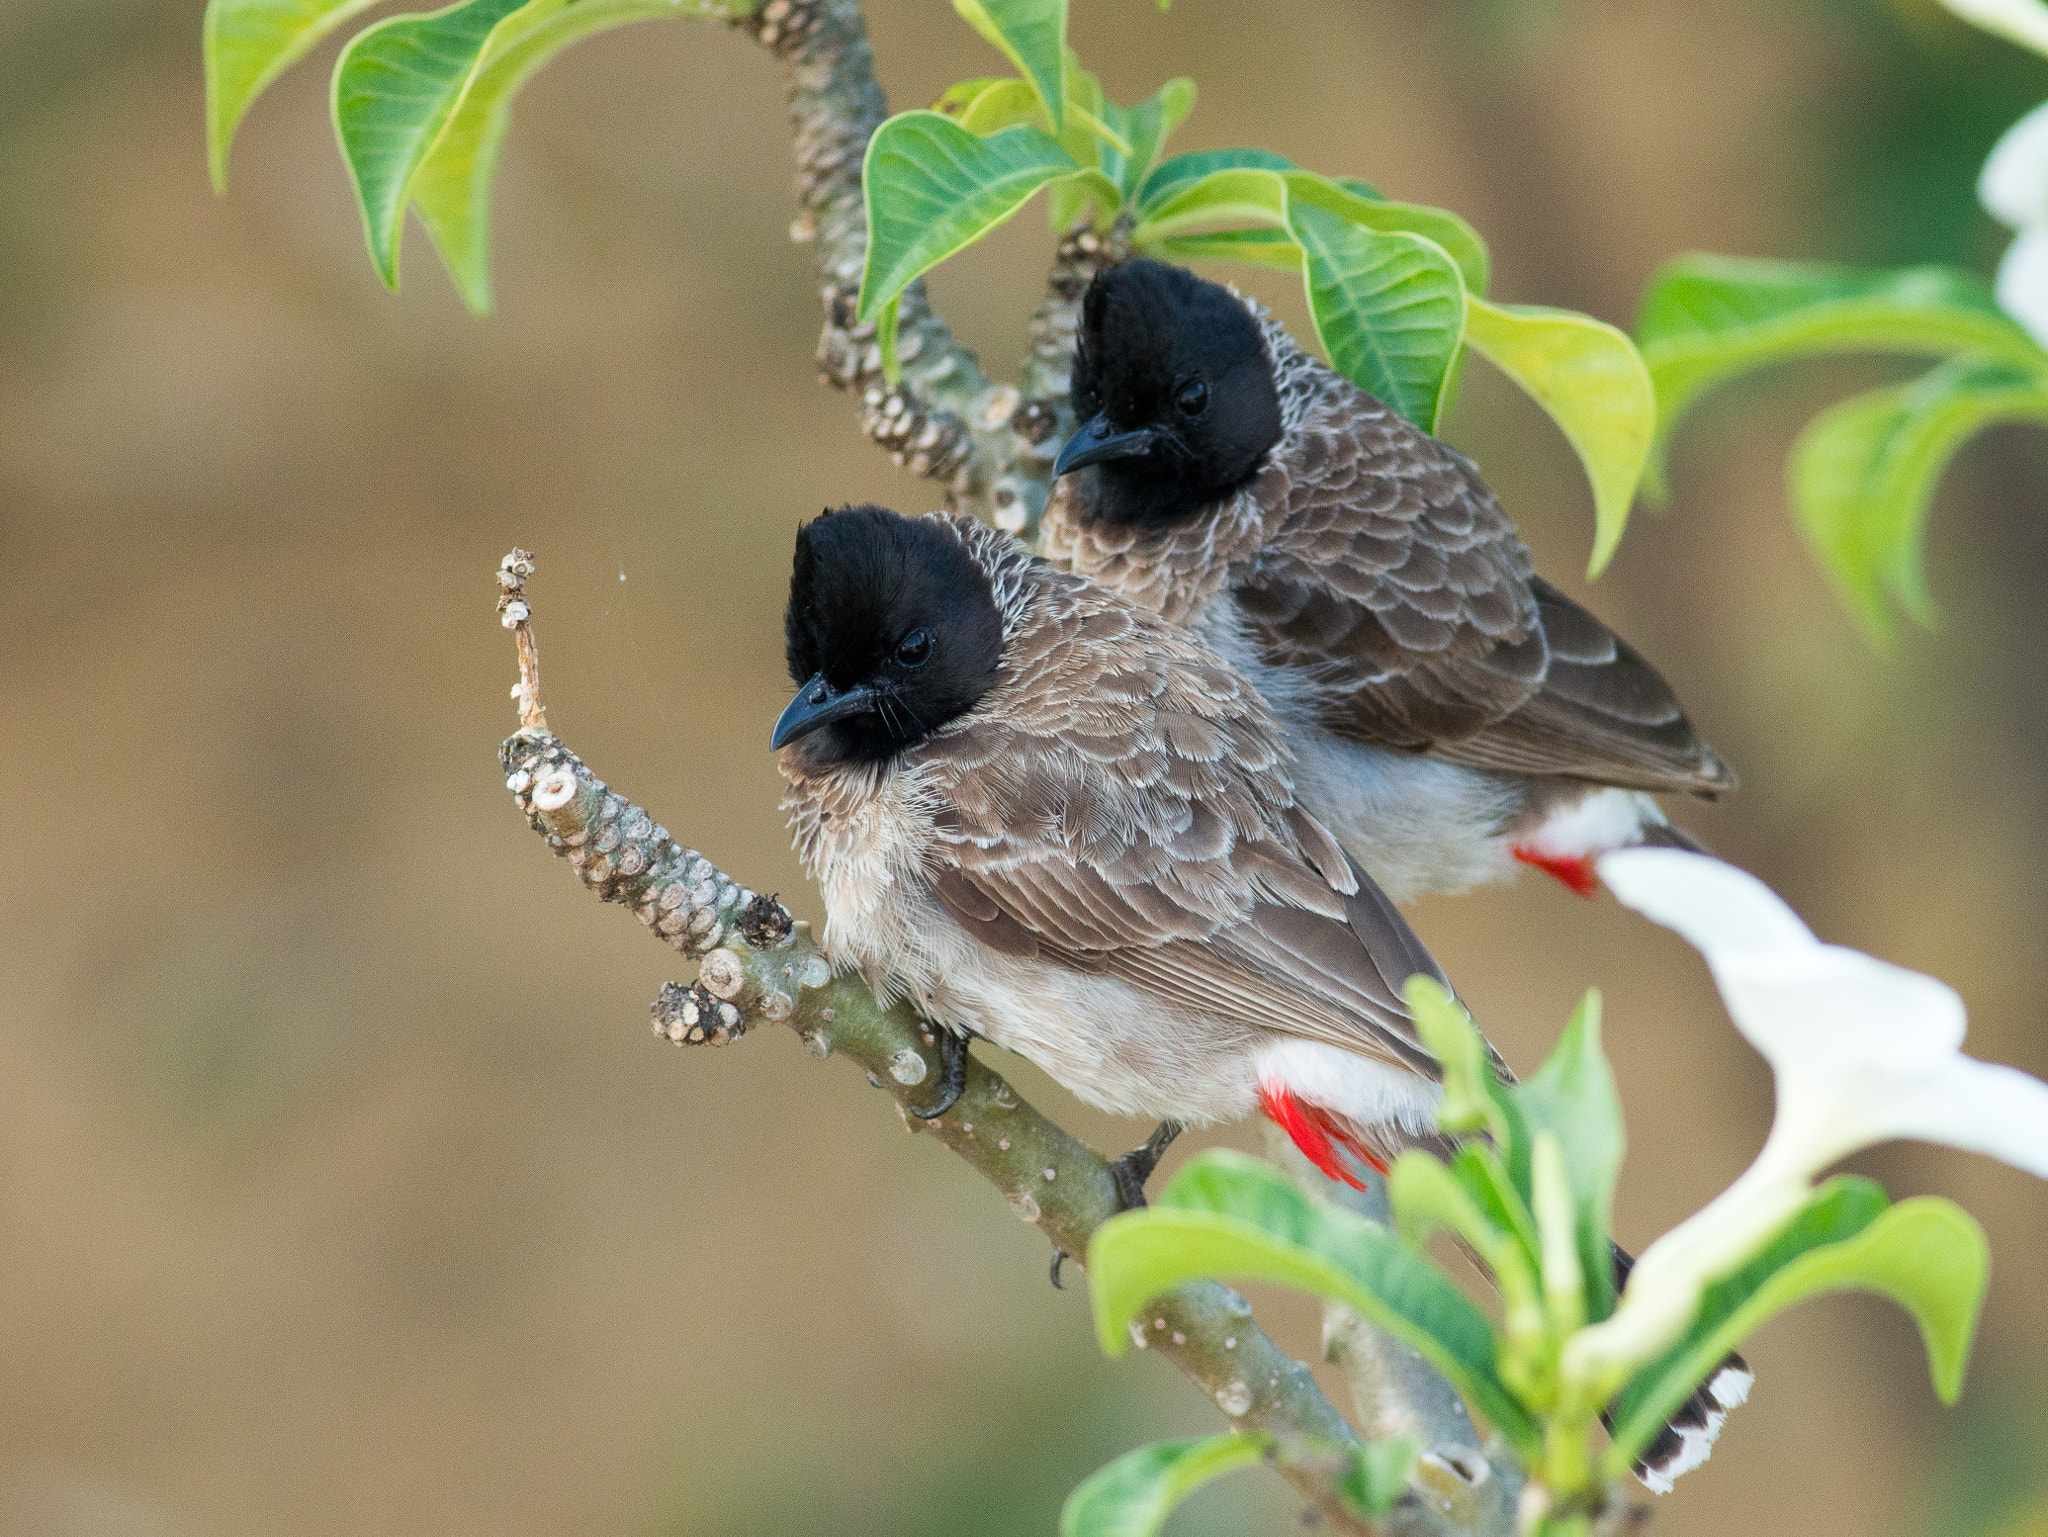 Metabones 400/5.6 sample photo. Red-vented bulbuls photography